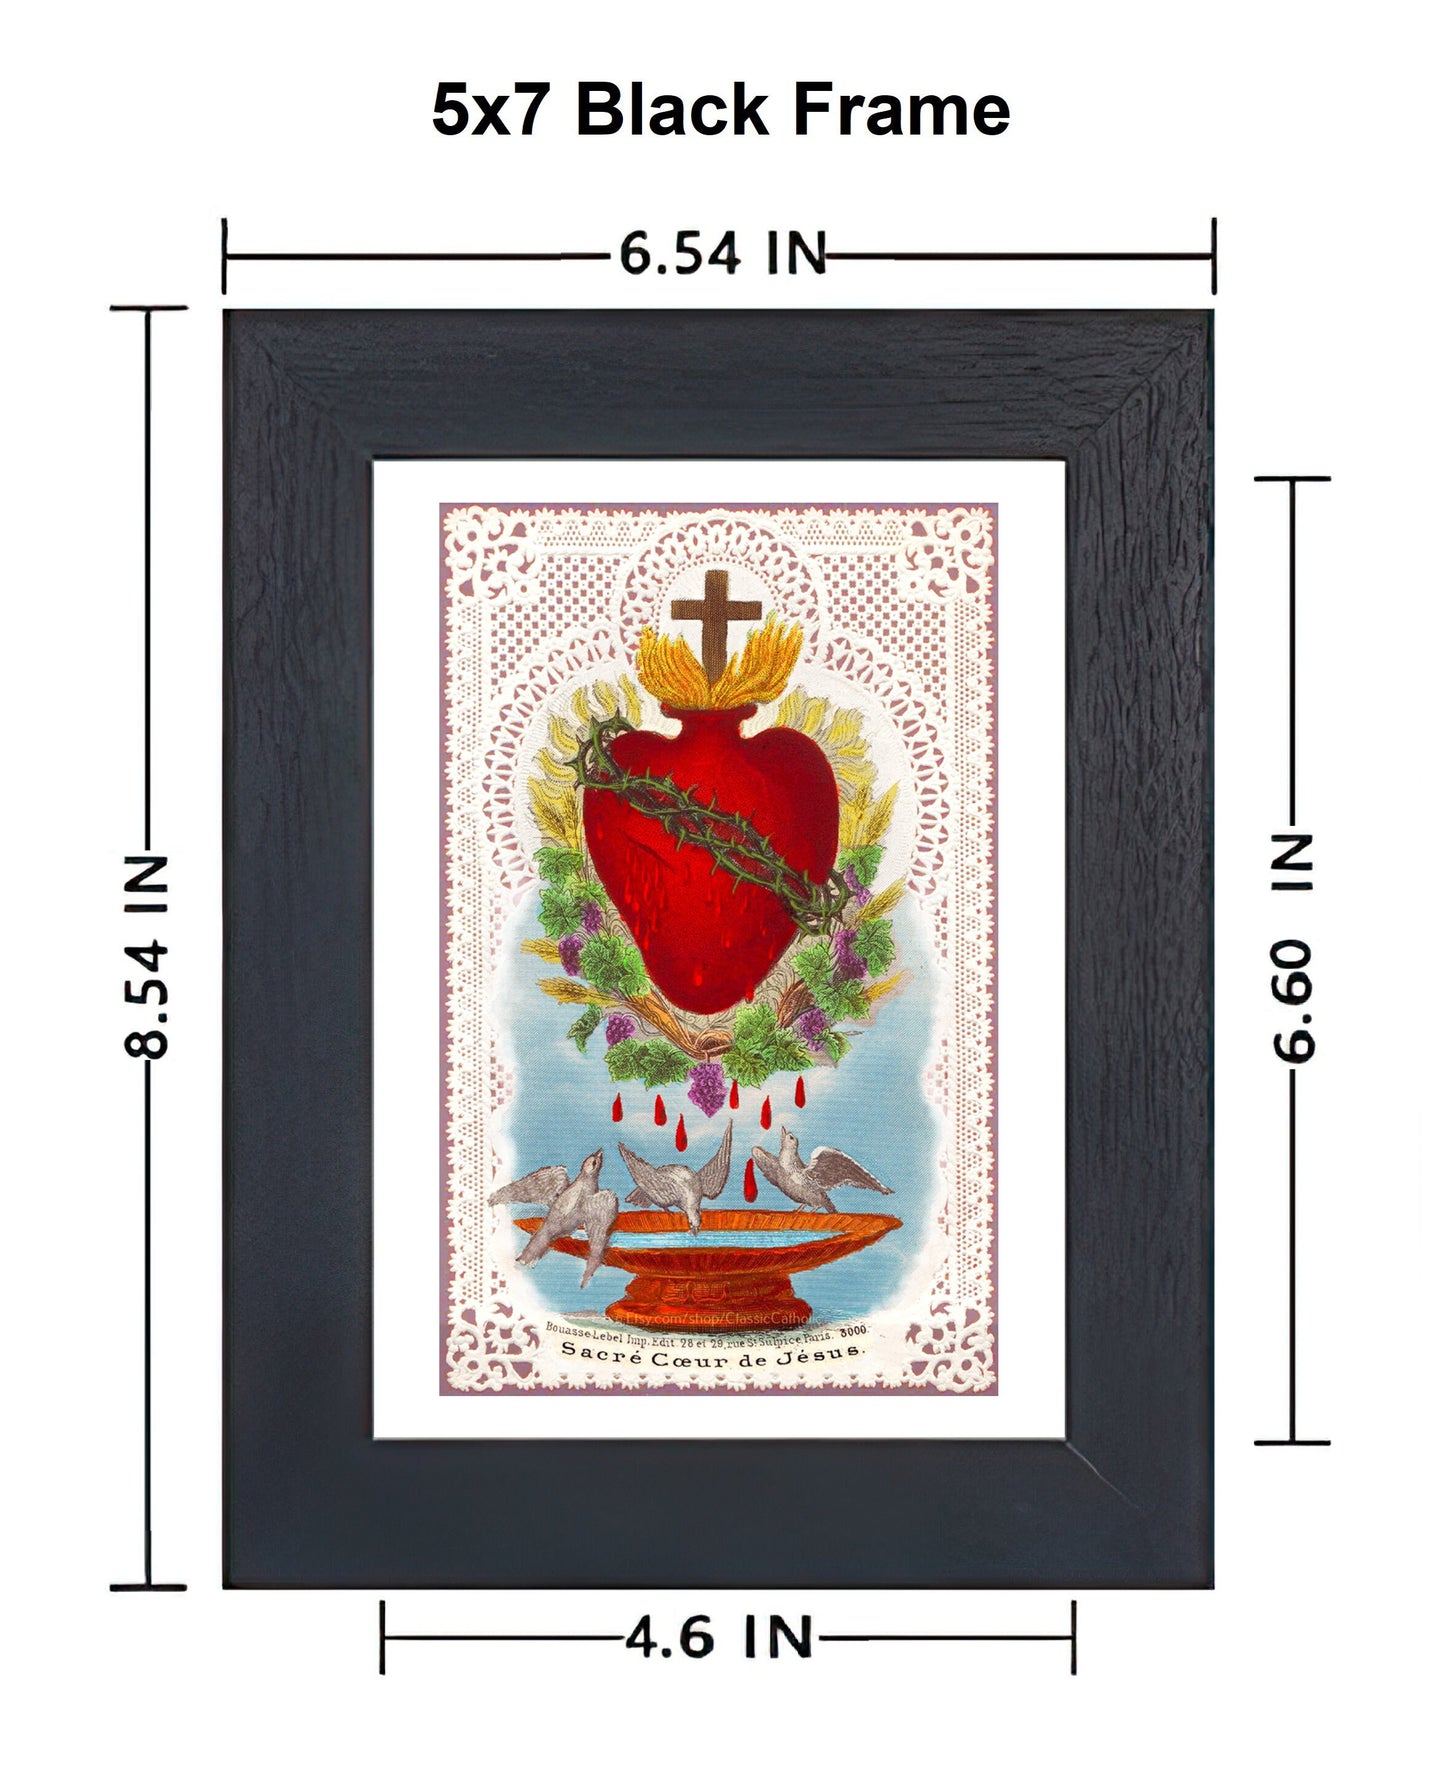 Sacred Heart of Jesus with Doves and Lace – based on a Vintage Holy Card – Catholic Art Print – Archival Quality